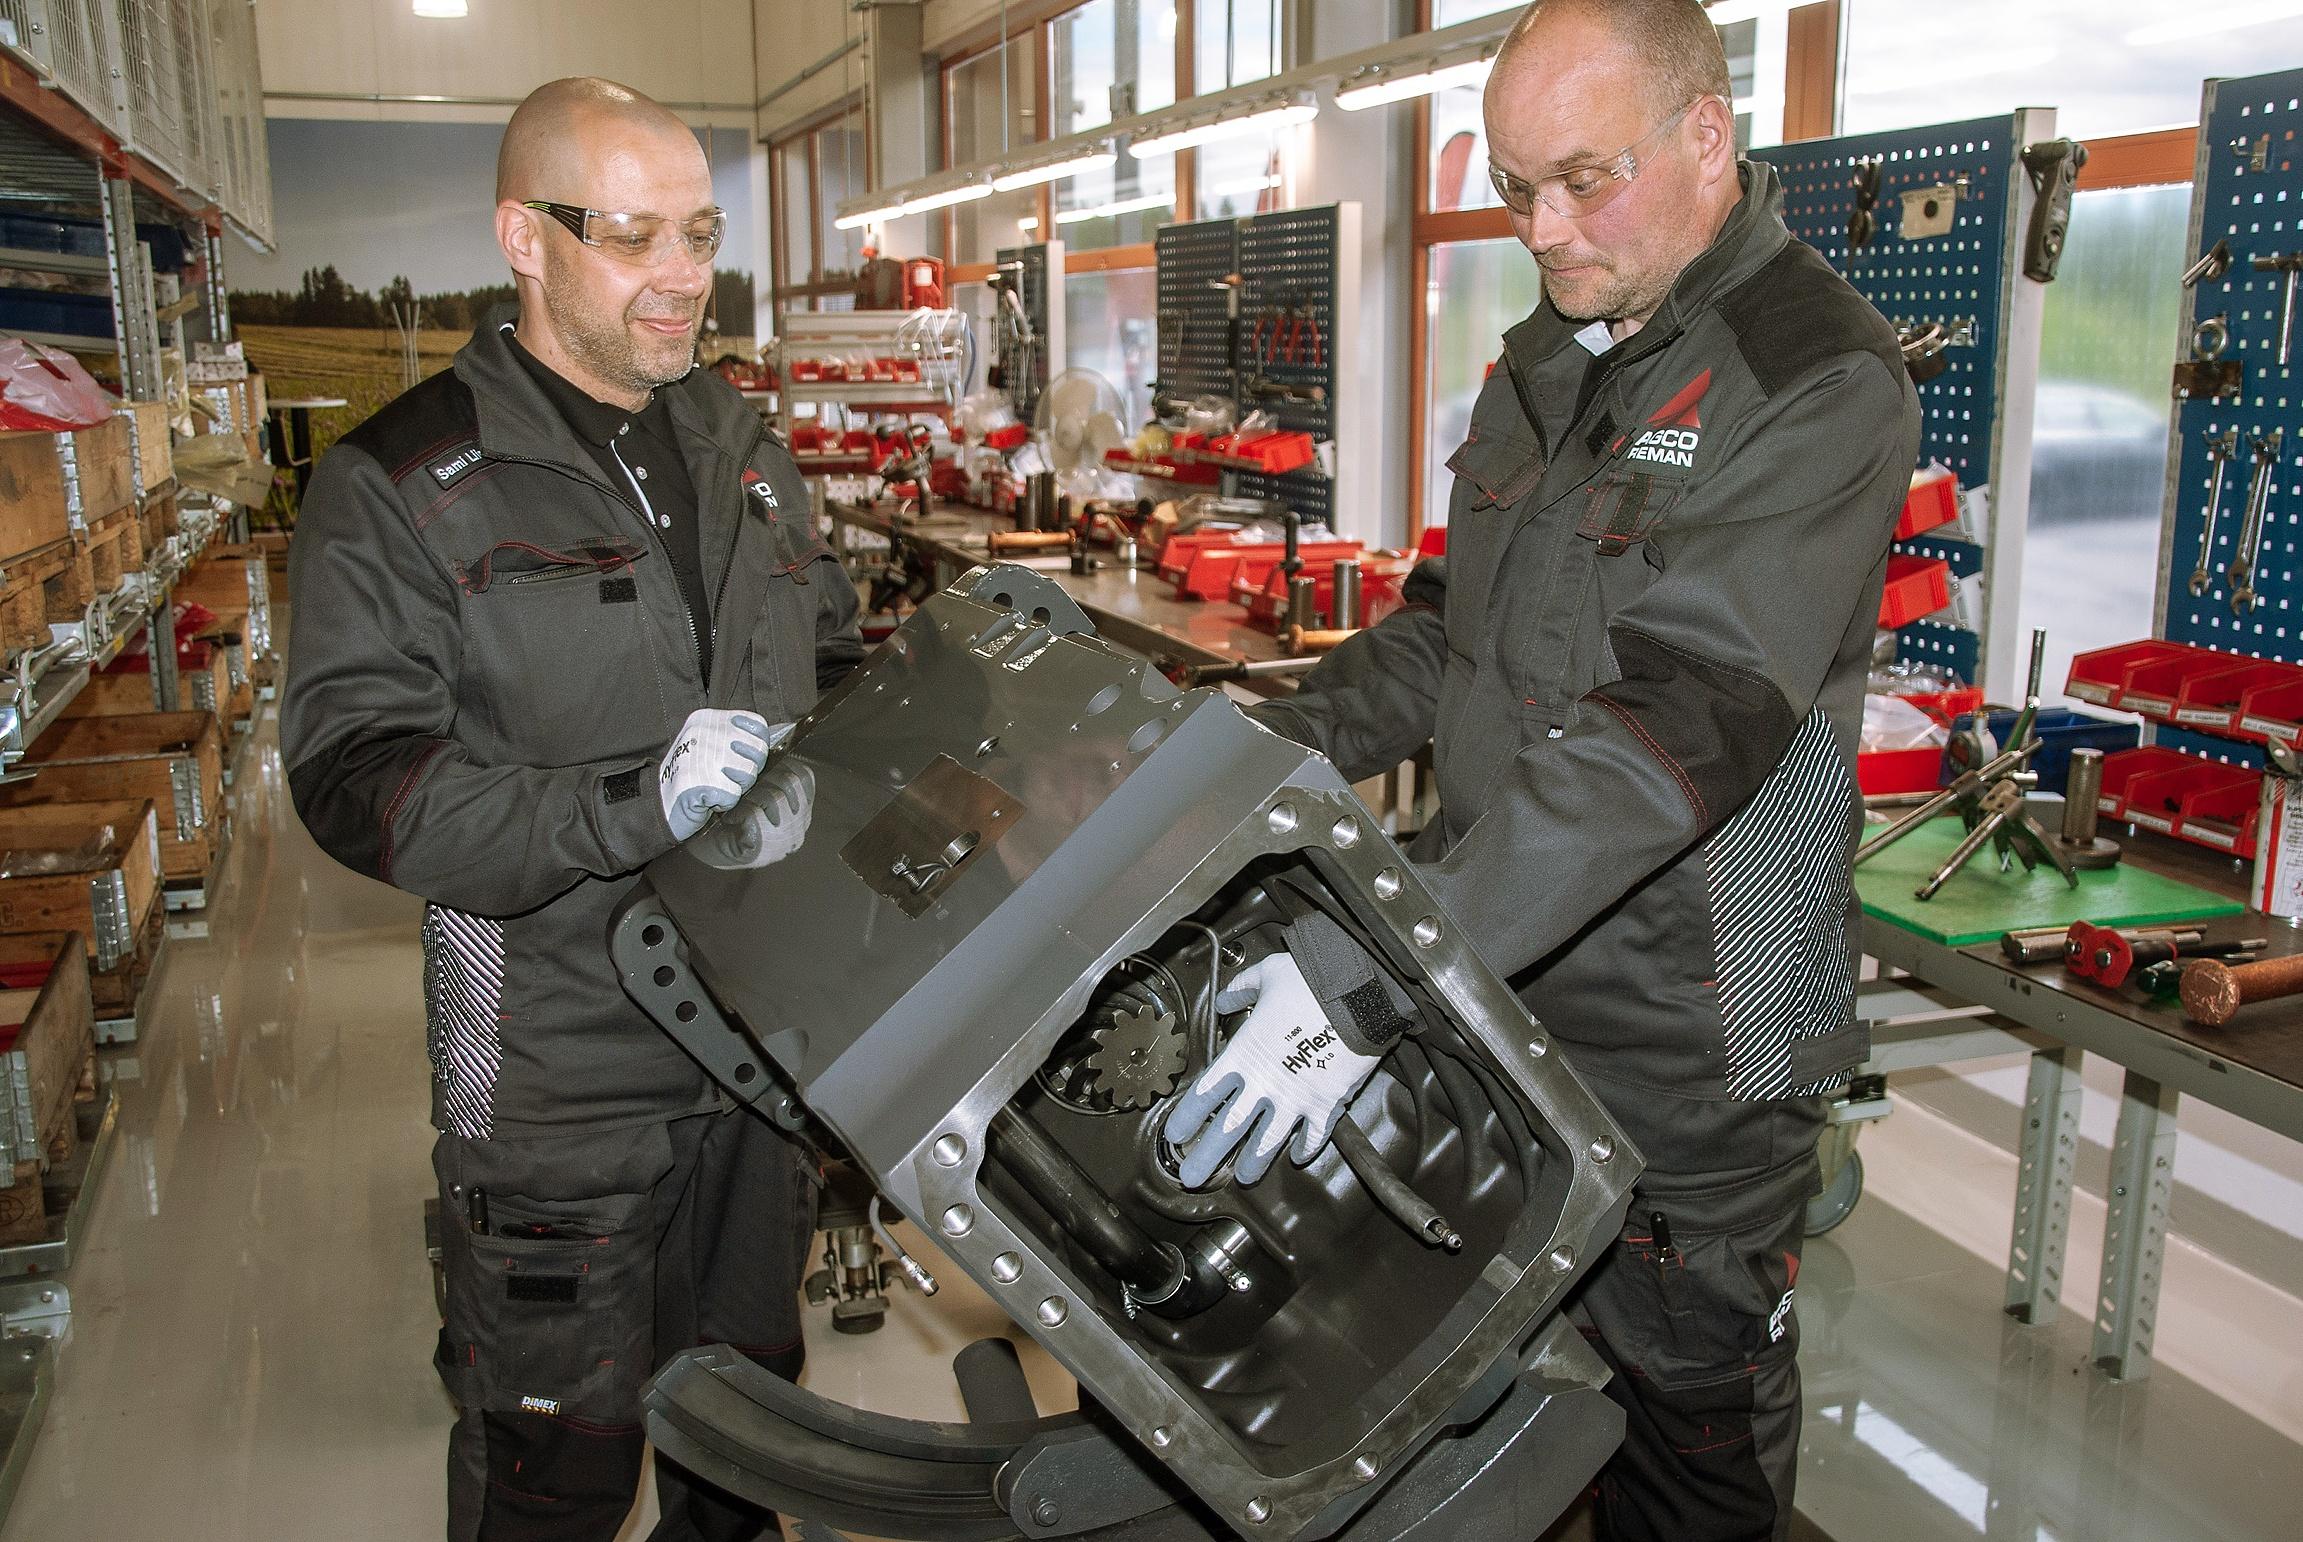 AGCO REMAN does Valtra regeneration of engine and transmission parts